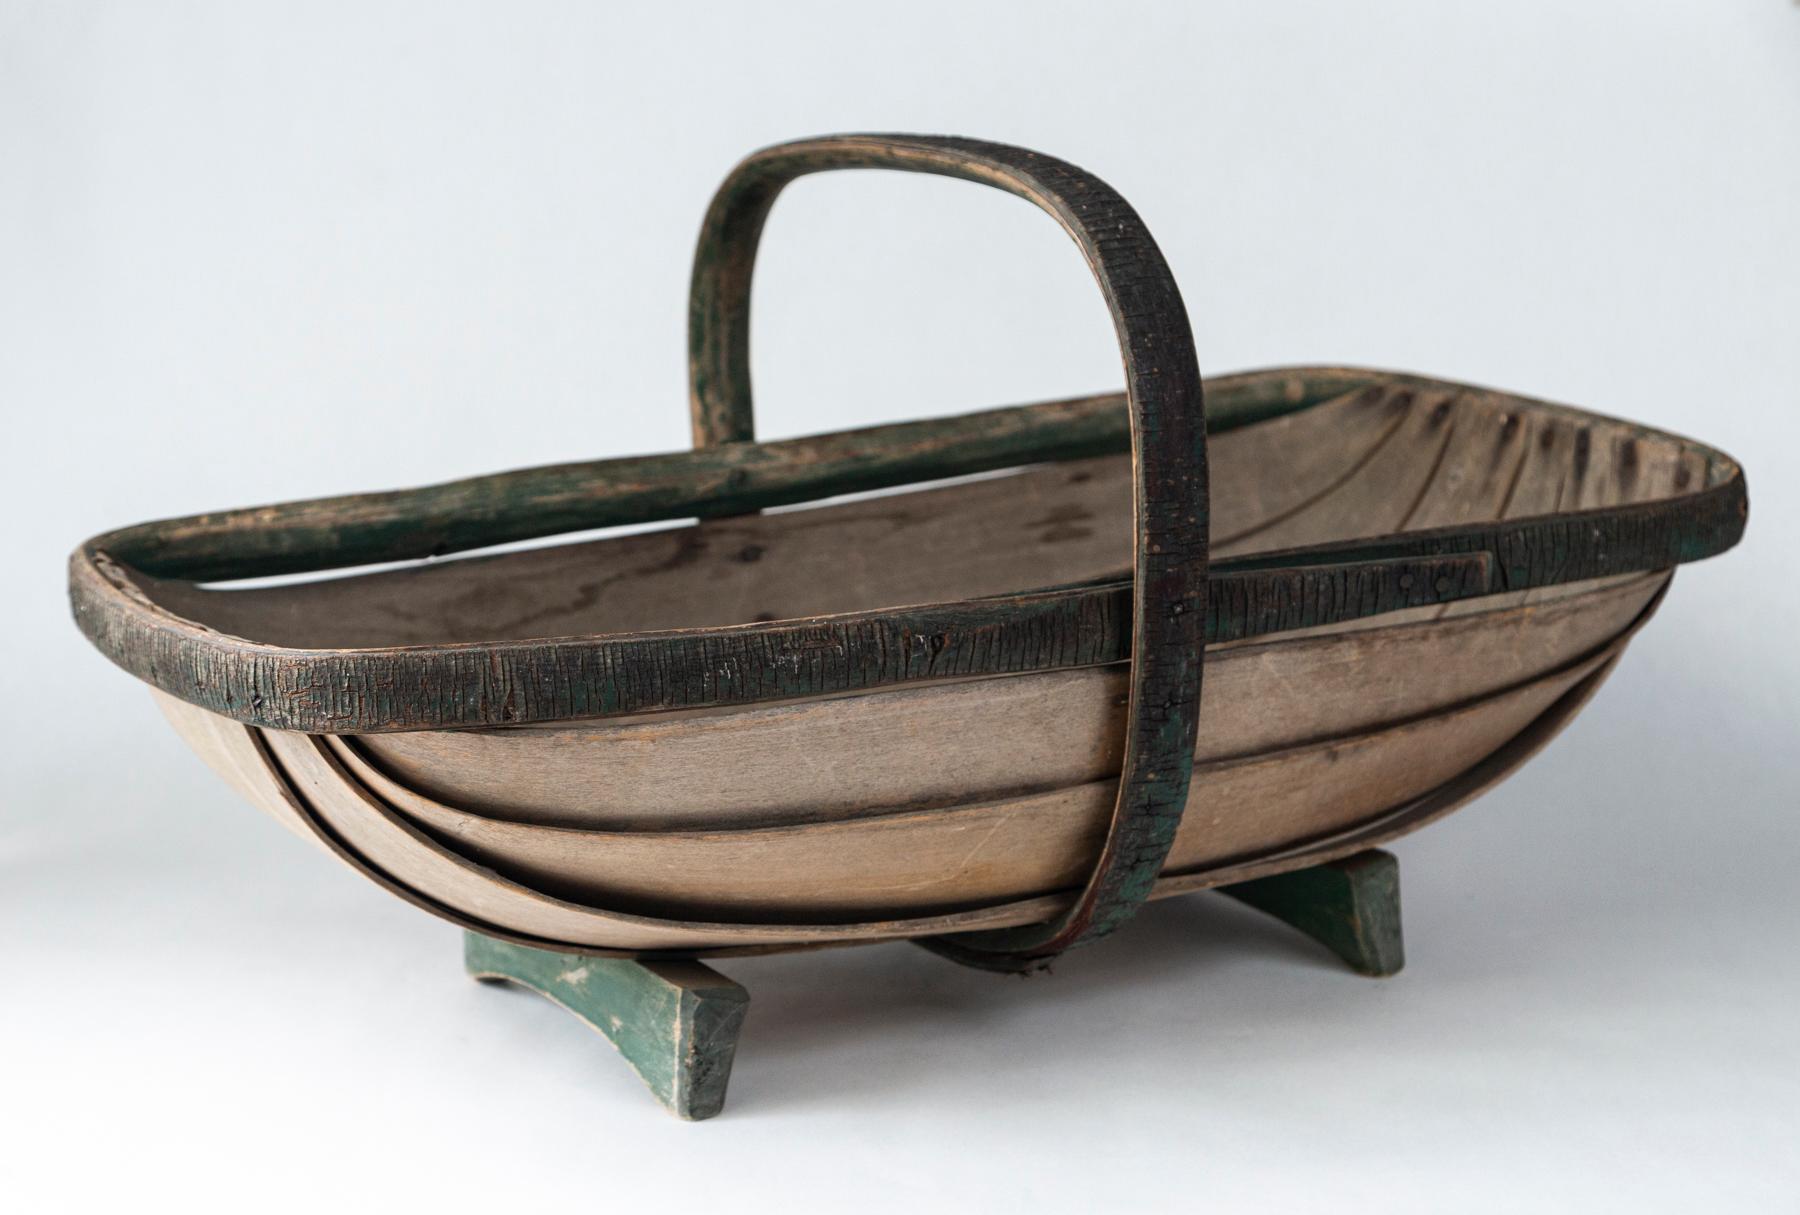 Vintage English garden trug (basket), circa 1930. Traditional Sussex oblong shape, bentwood construction. Trugs were designed to gather flowers and herbs from the garden. Lovely aged wood surface with original paint.